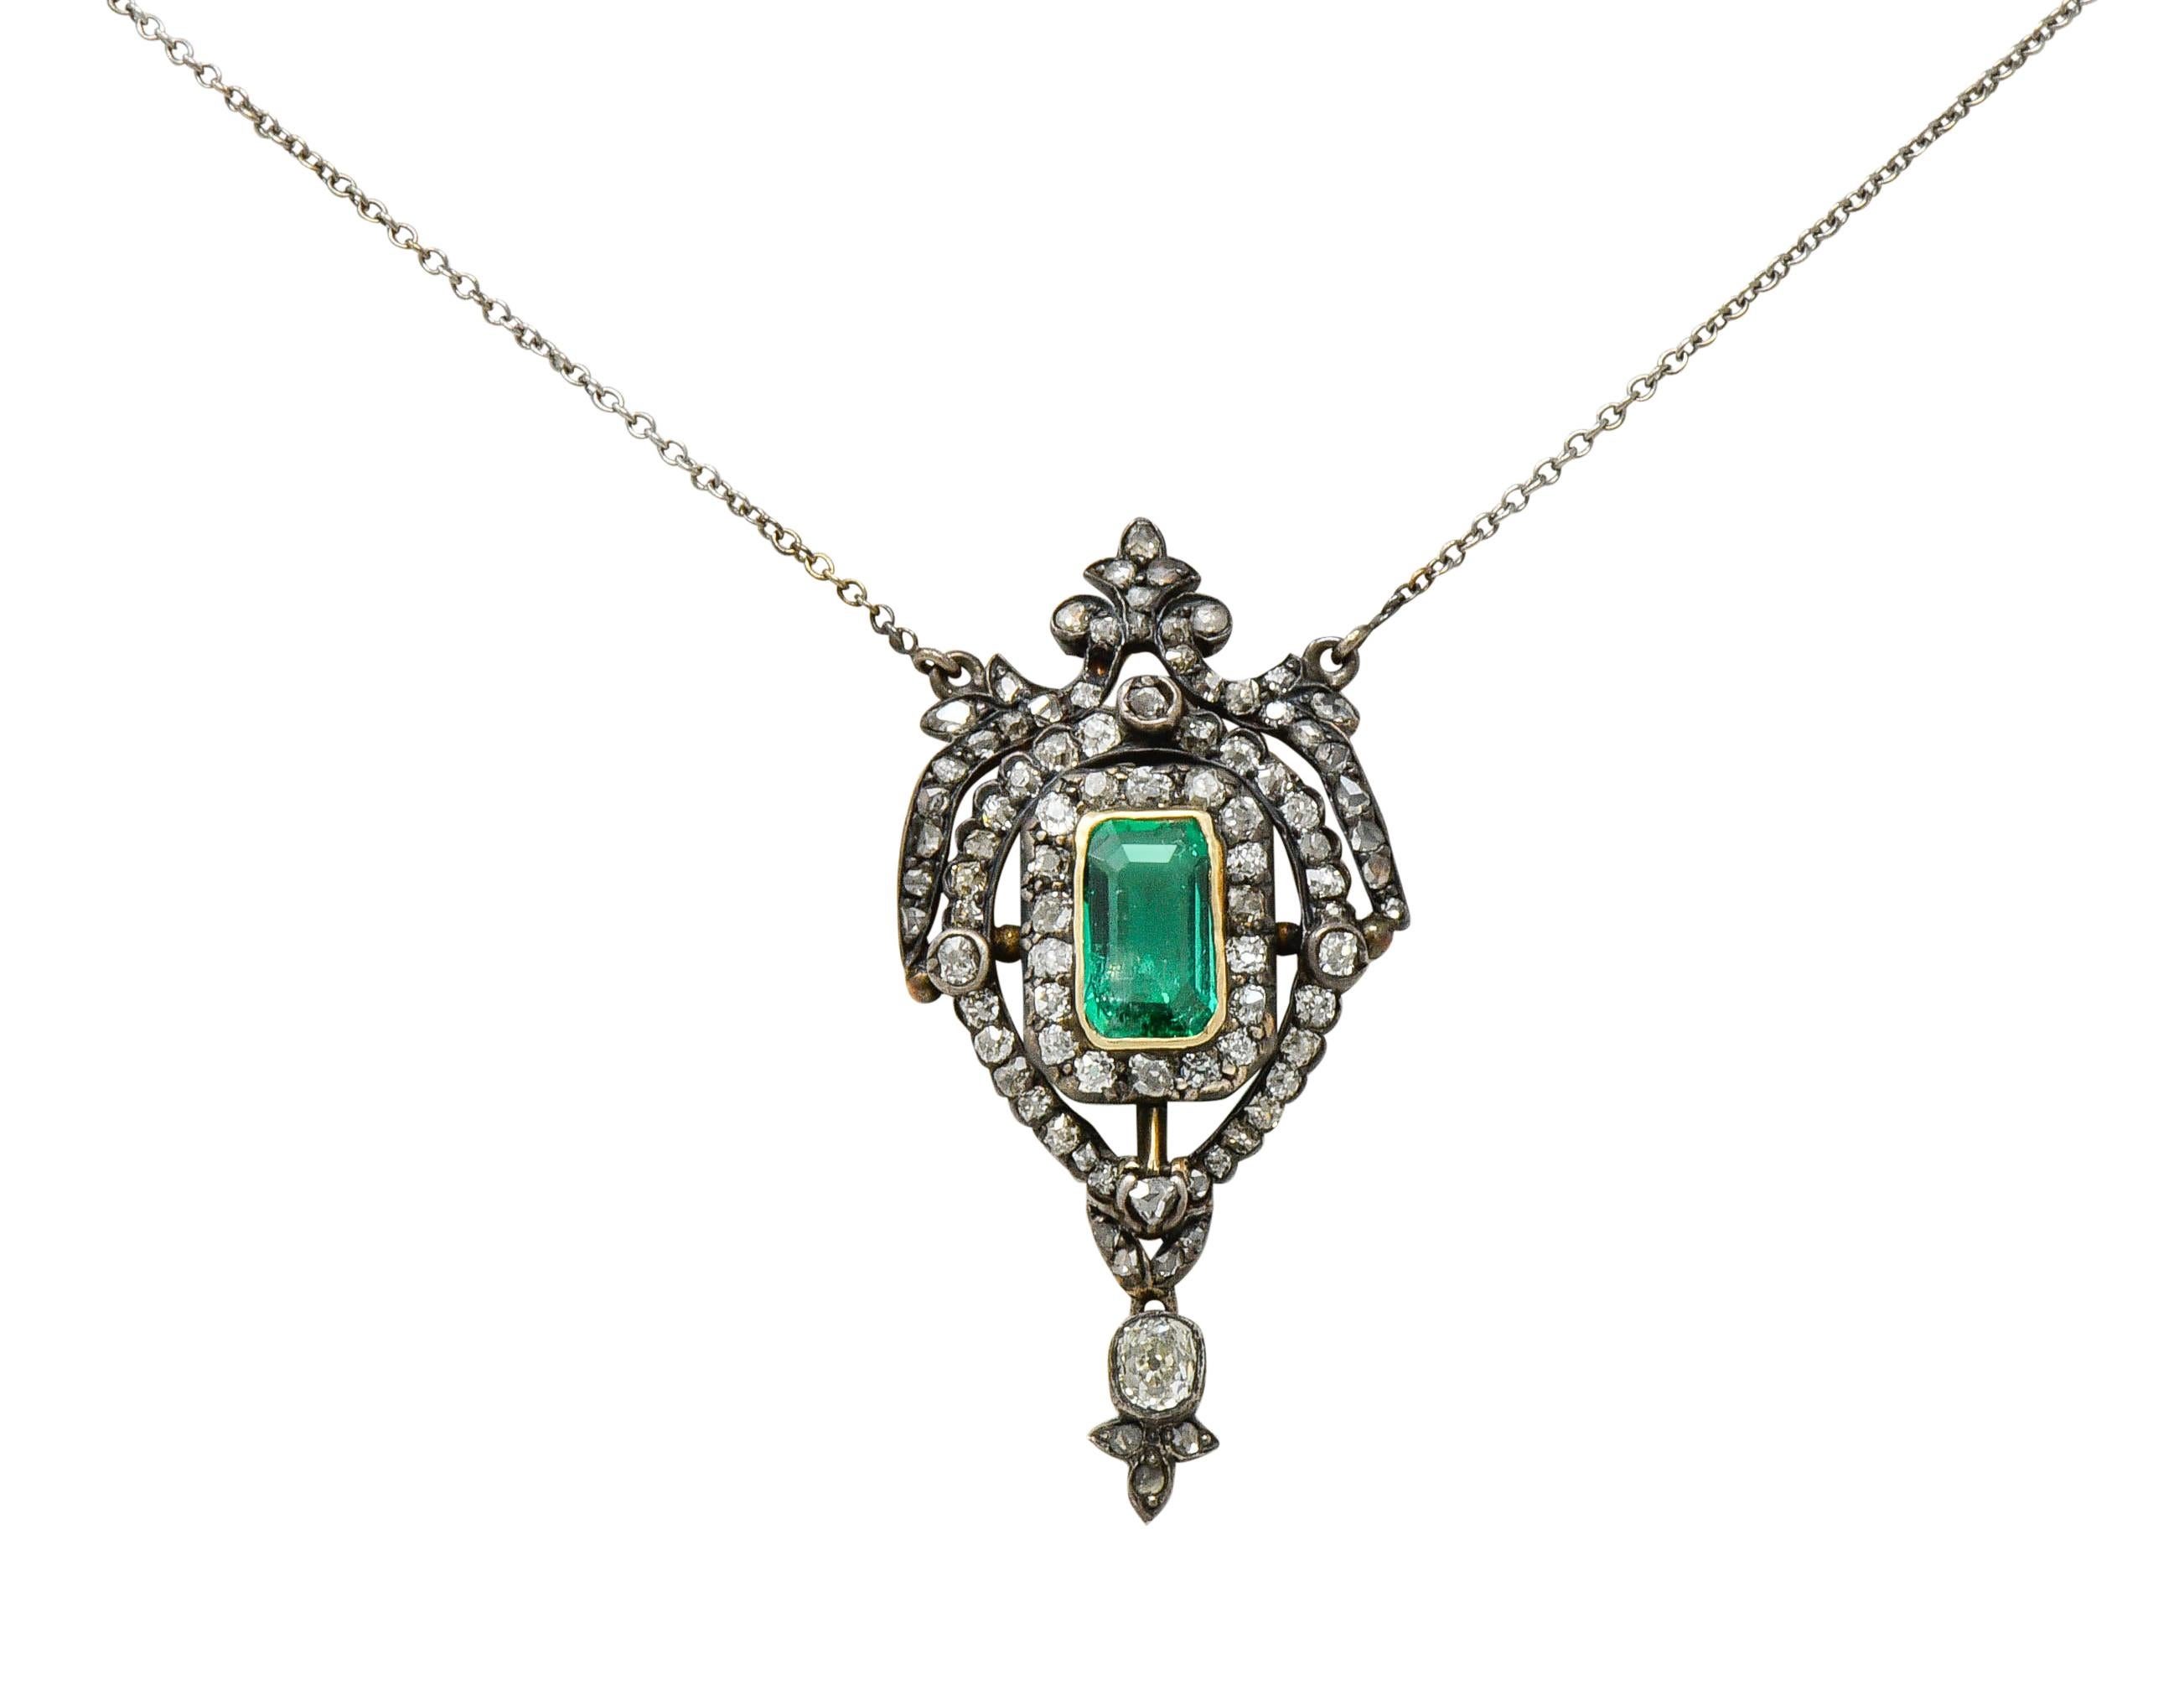 Early Victorian Emerald Diamond Silver-Topped Gold Ornate Drop Necklace 1